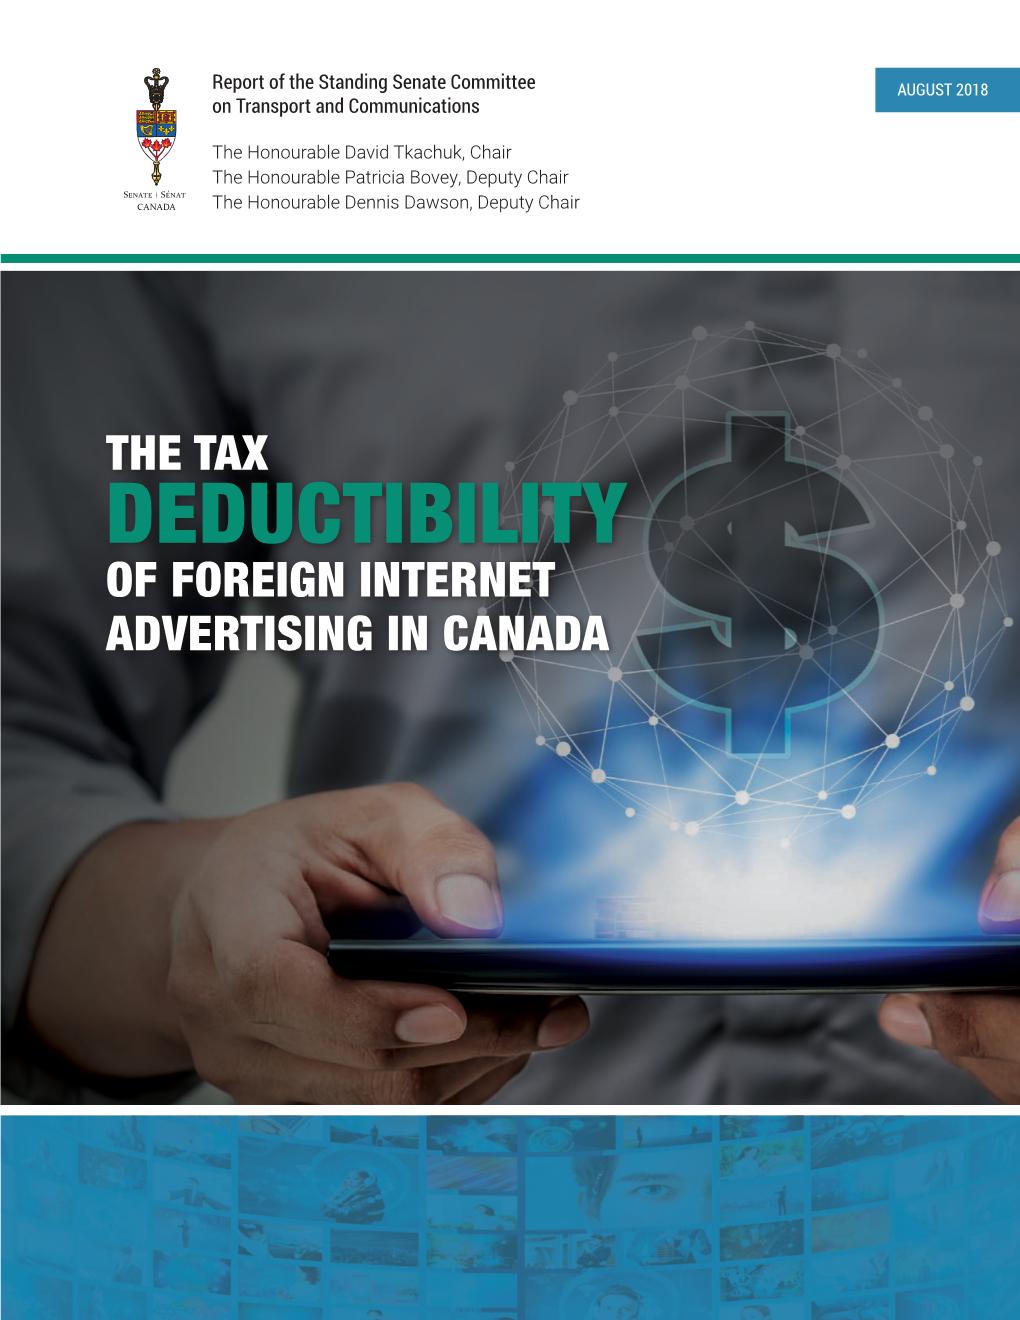 The Tax Deductibility of Foreign Internet Advertising in Canada Sbk>Qb SK>Q Canada